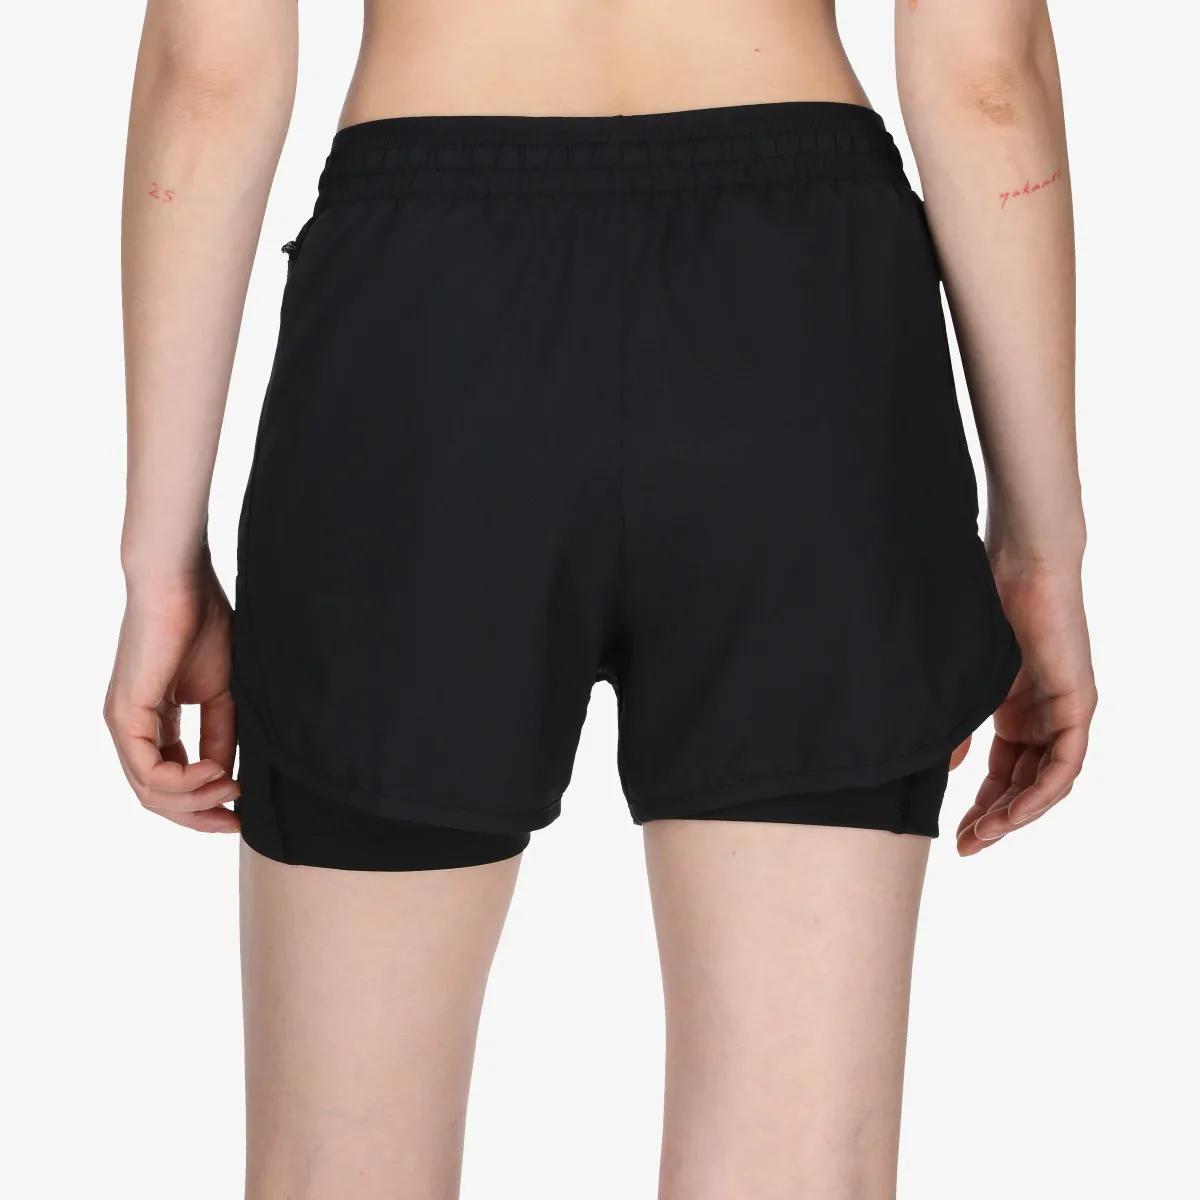 NIKE W NK TEMPO LUXE 2IN1 SHORT 